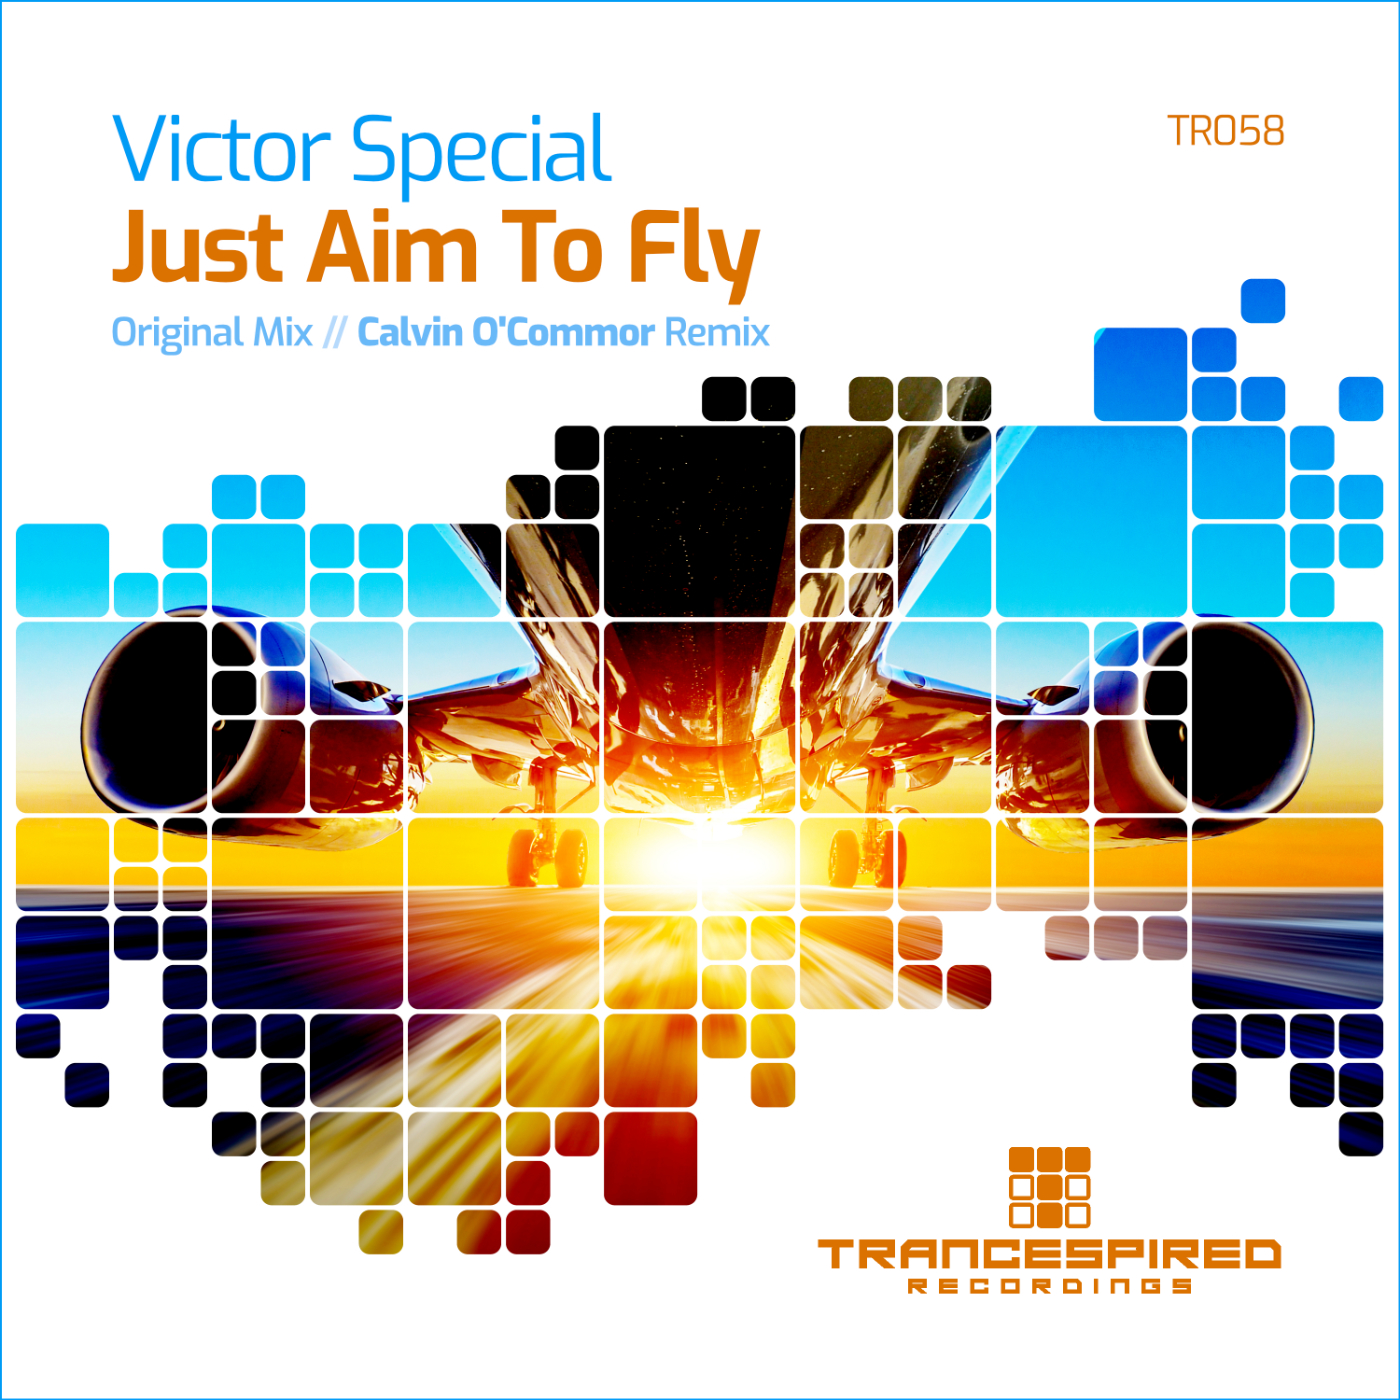 Victor Special presents Just Aim To Fly on Trancespired Recordings